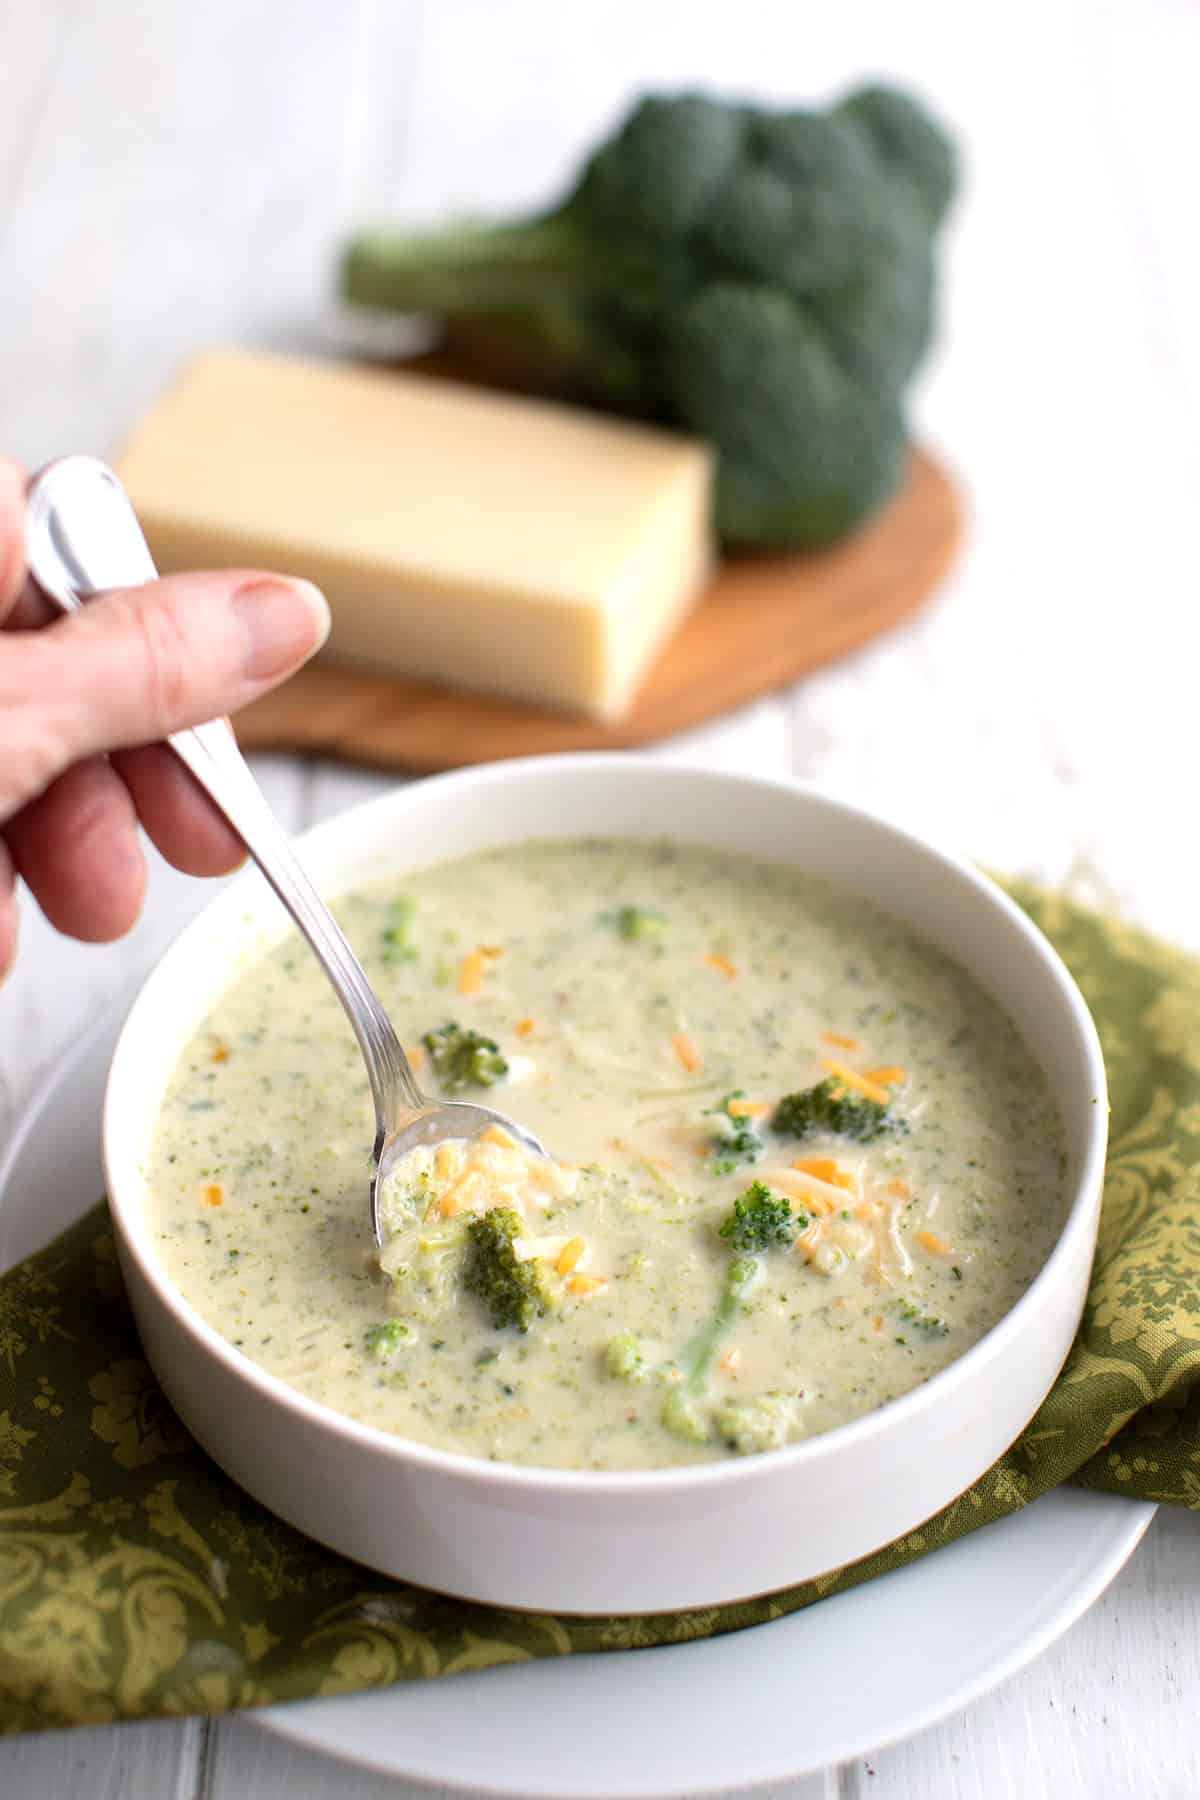 A hand reaching a spoon into a bowl of keto broccoli cheese soup.